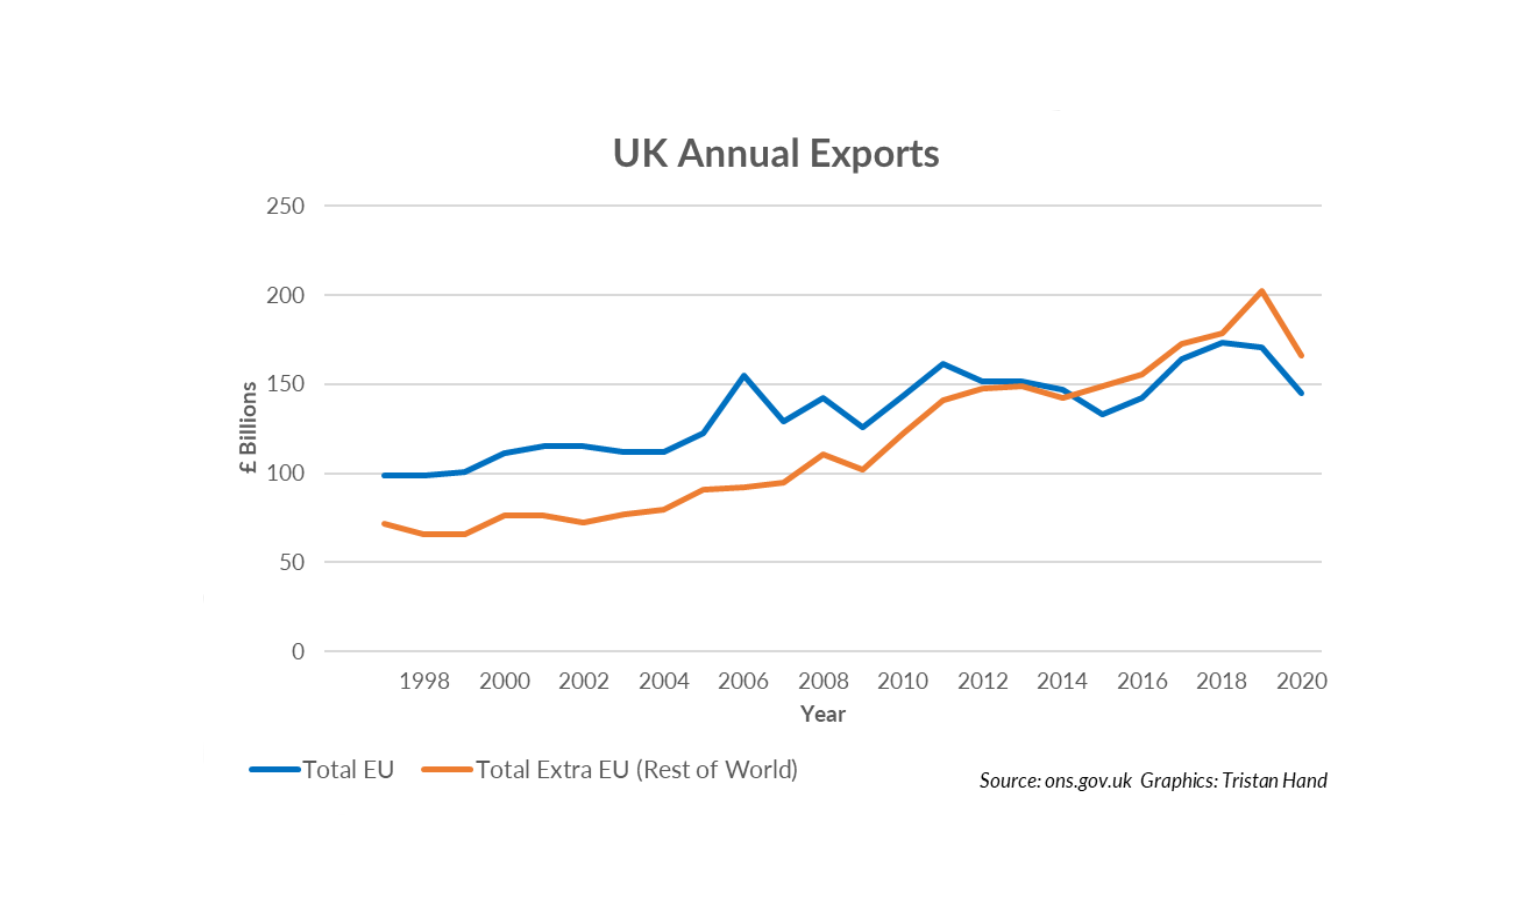 Featured image of graph showing UK annual exports